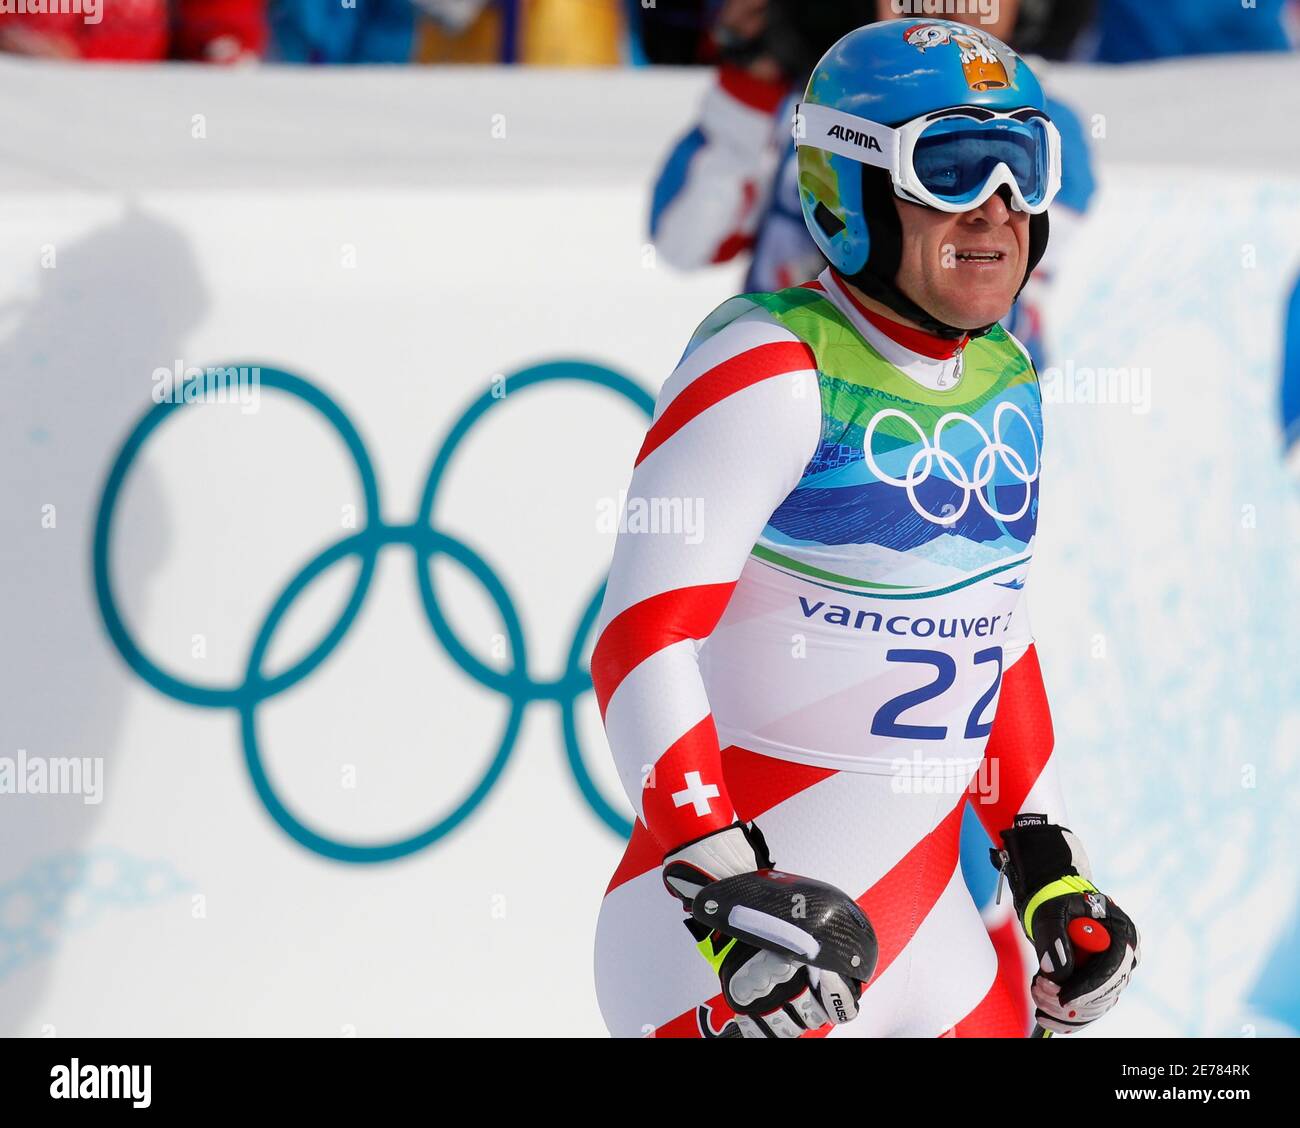 Didier Cuche of Switzerland looks at his time after competing in the men's  Alpine Skiing Downhill